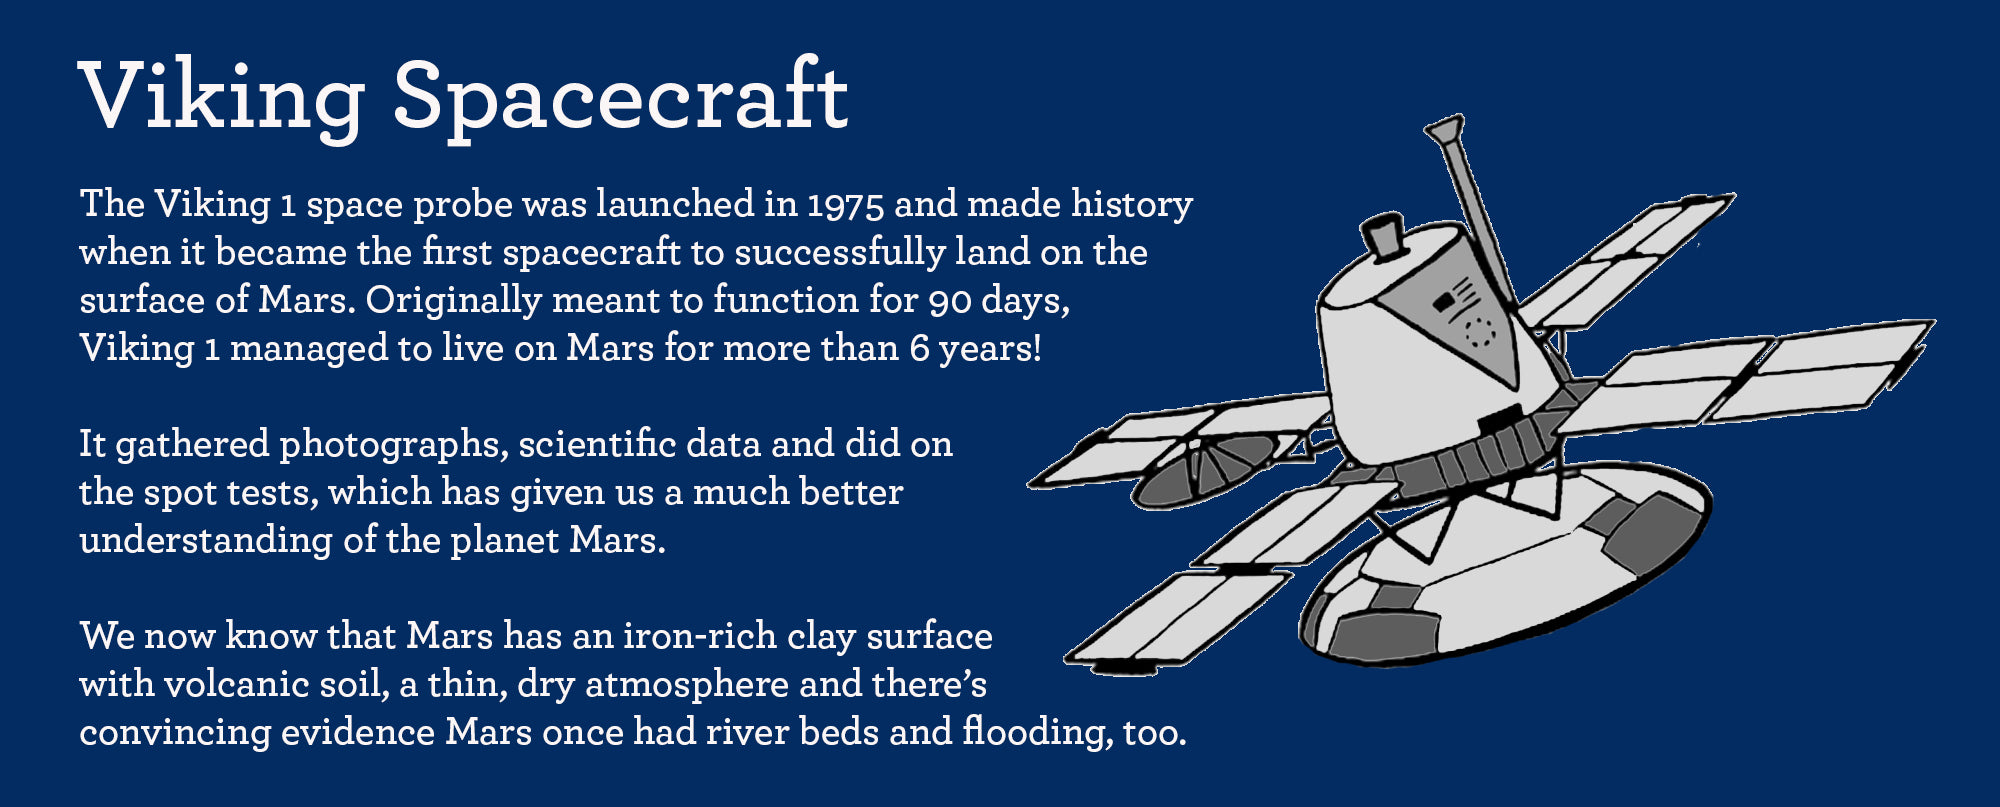 facts about viking 1 spacecraft